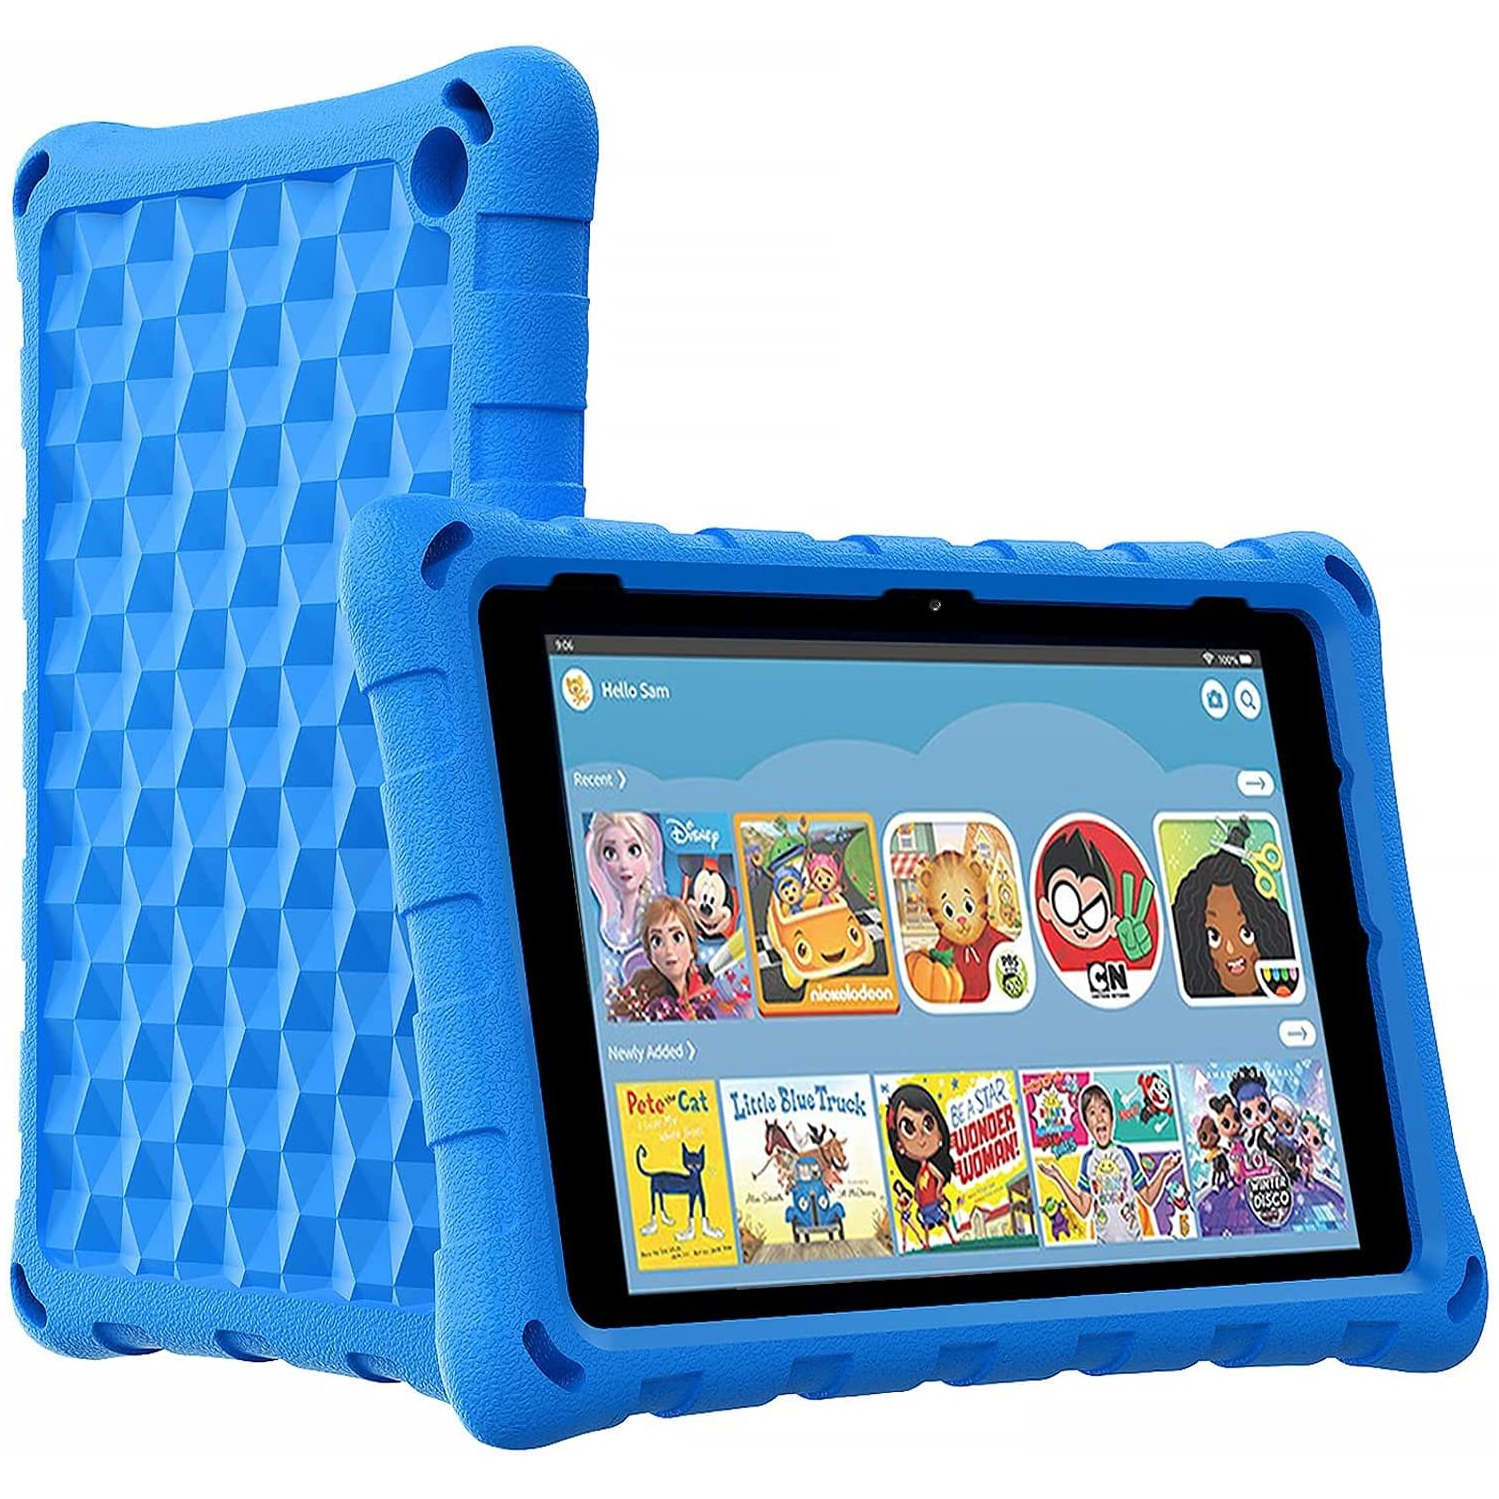 Fire 7 Tablet Case for Kids or Business use S 2022 New Kindle Fire 7 Case, Extra Thick Protective Layer Double-Layer Shockproof in Four Corners (Blue)